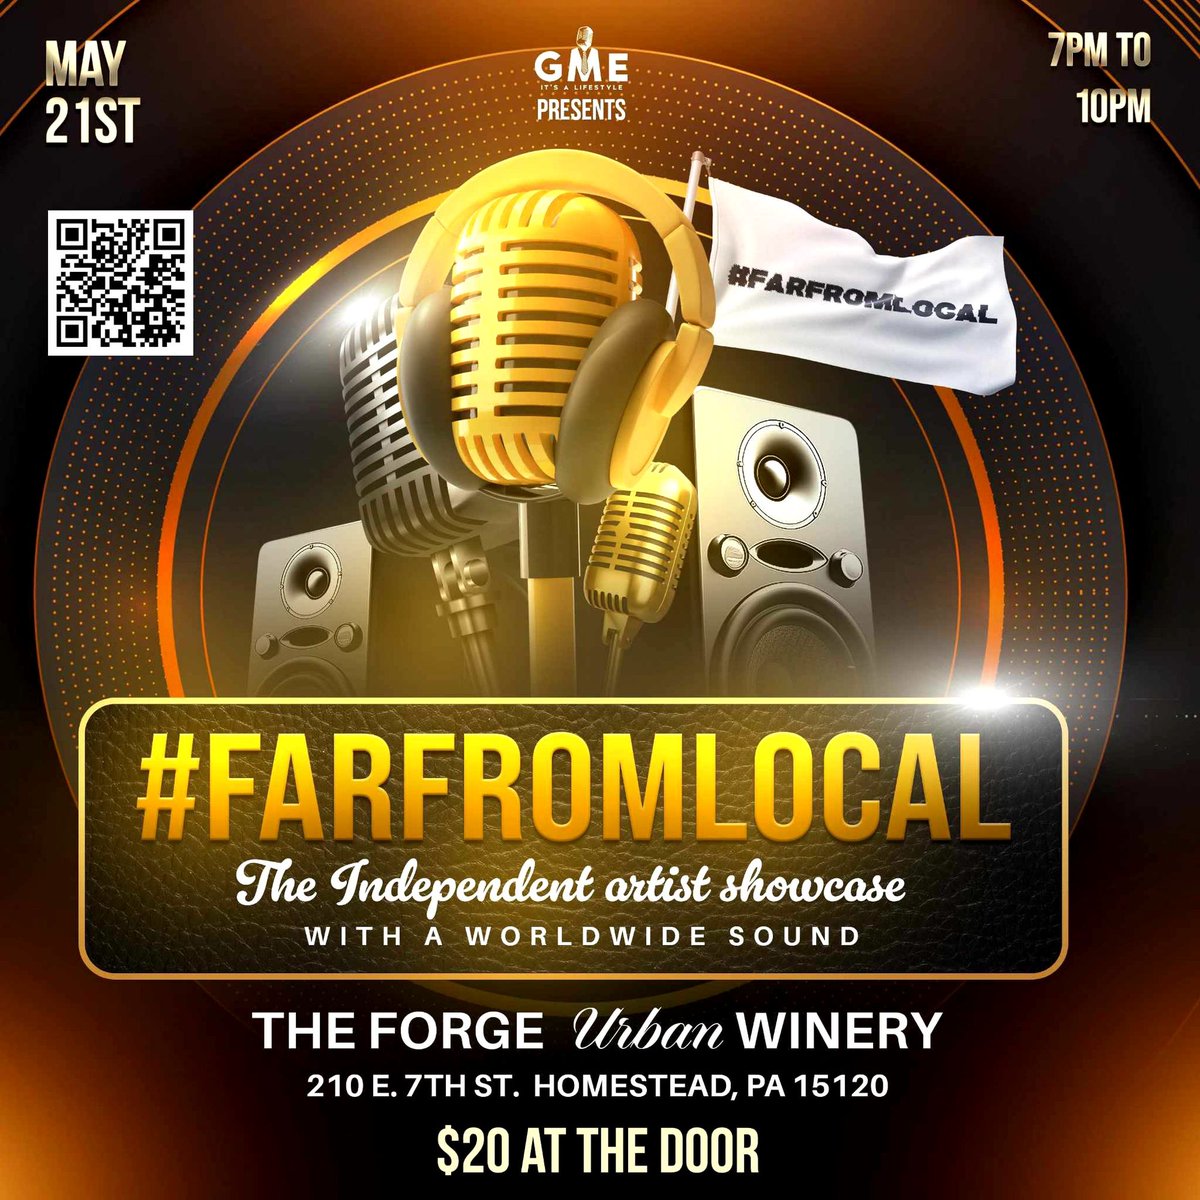 Get ready to experience the pulse of Pittsburgh's indie urban music at #FARFROMLOCAL , an independent artist showcase  at The Forge Urban Winery on May 21st. Don't miss out! #squareoneradio #GME #indierap #indiehiphop #indiernb